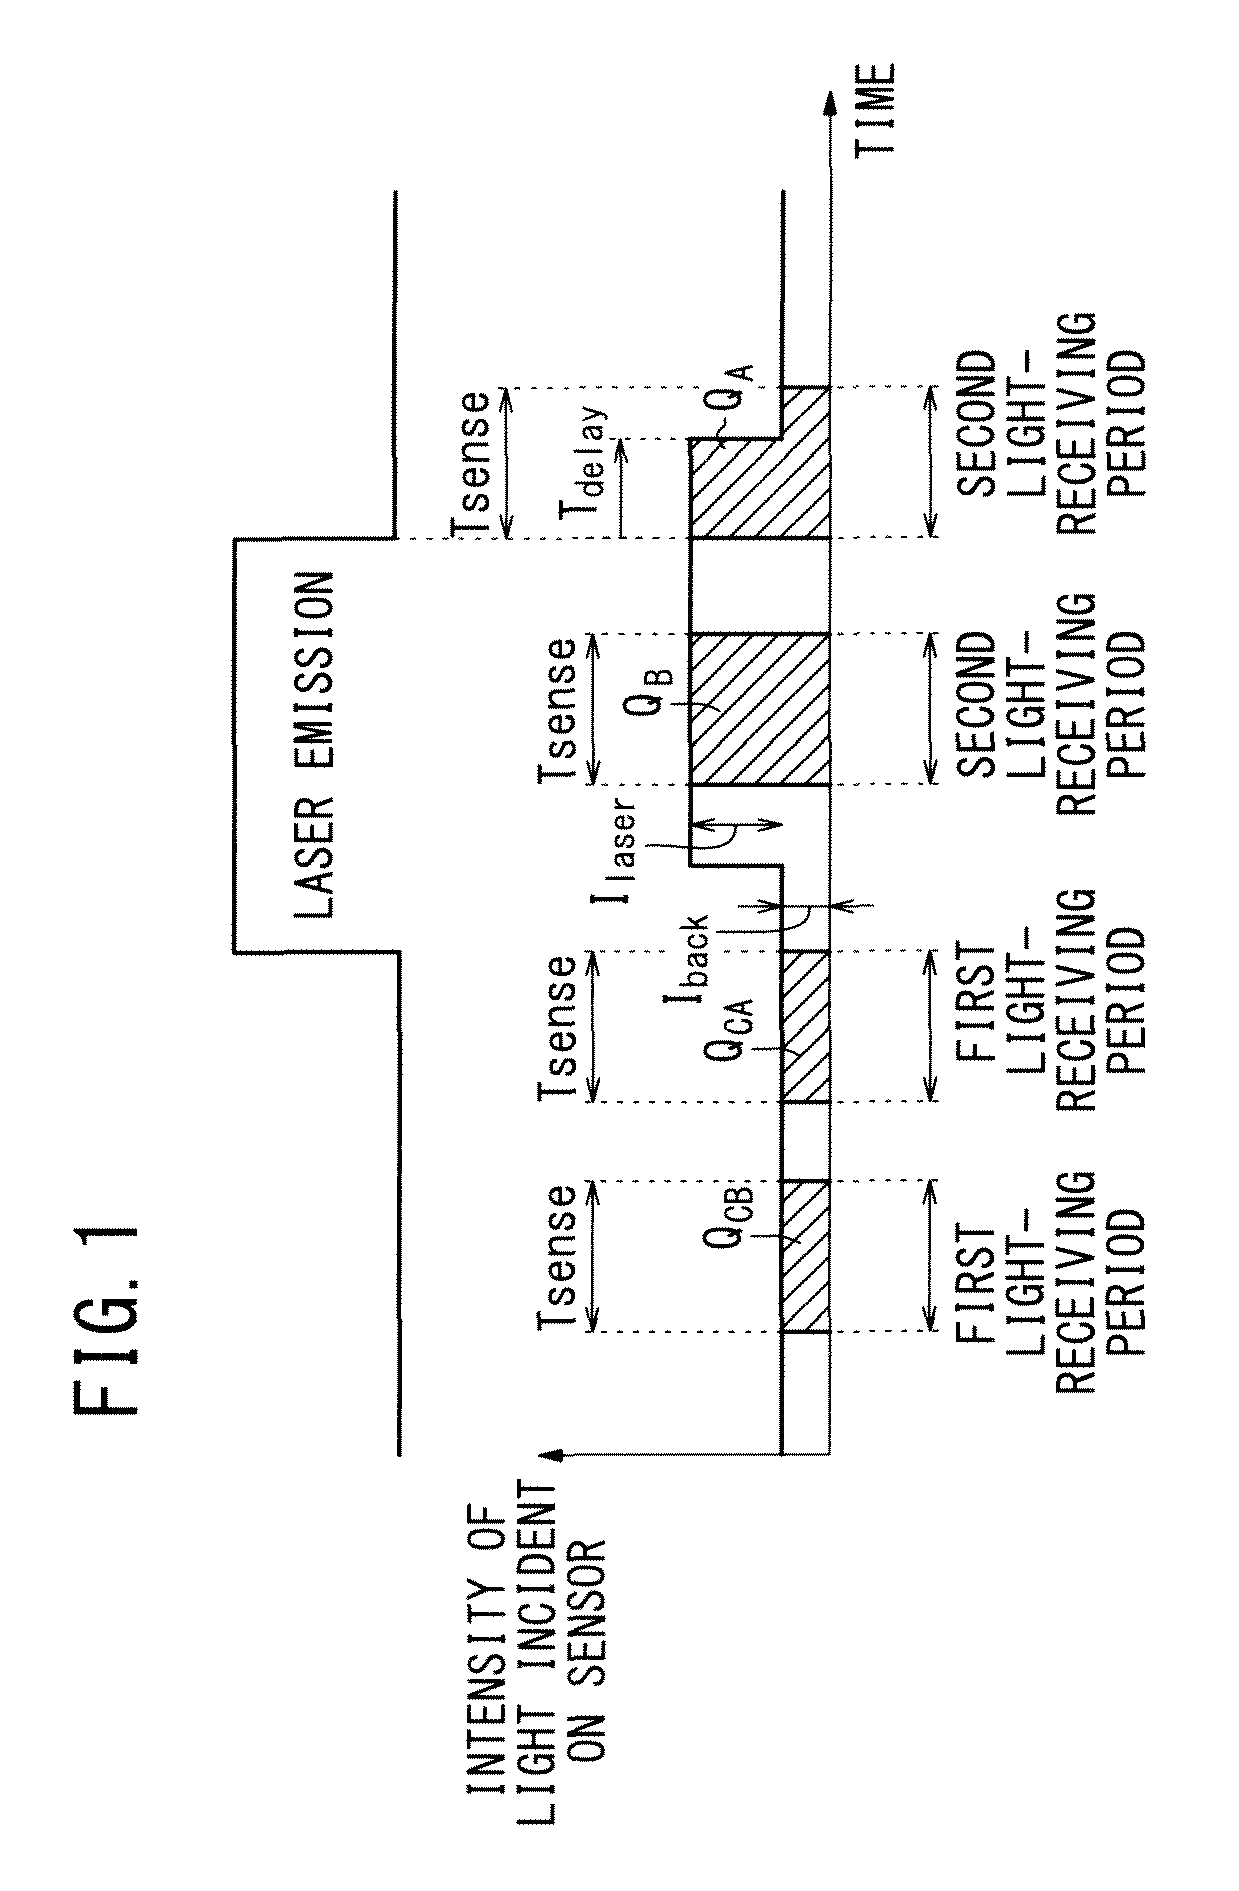 Solid-state image sensing device with a change-over switch